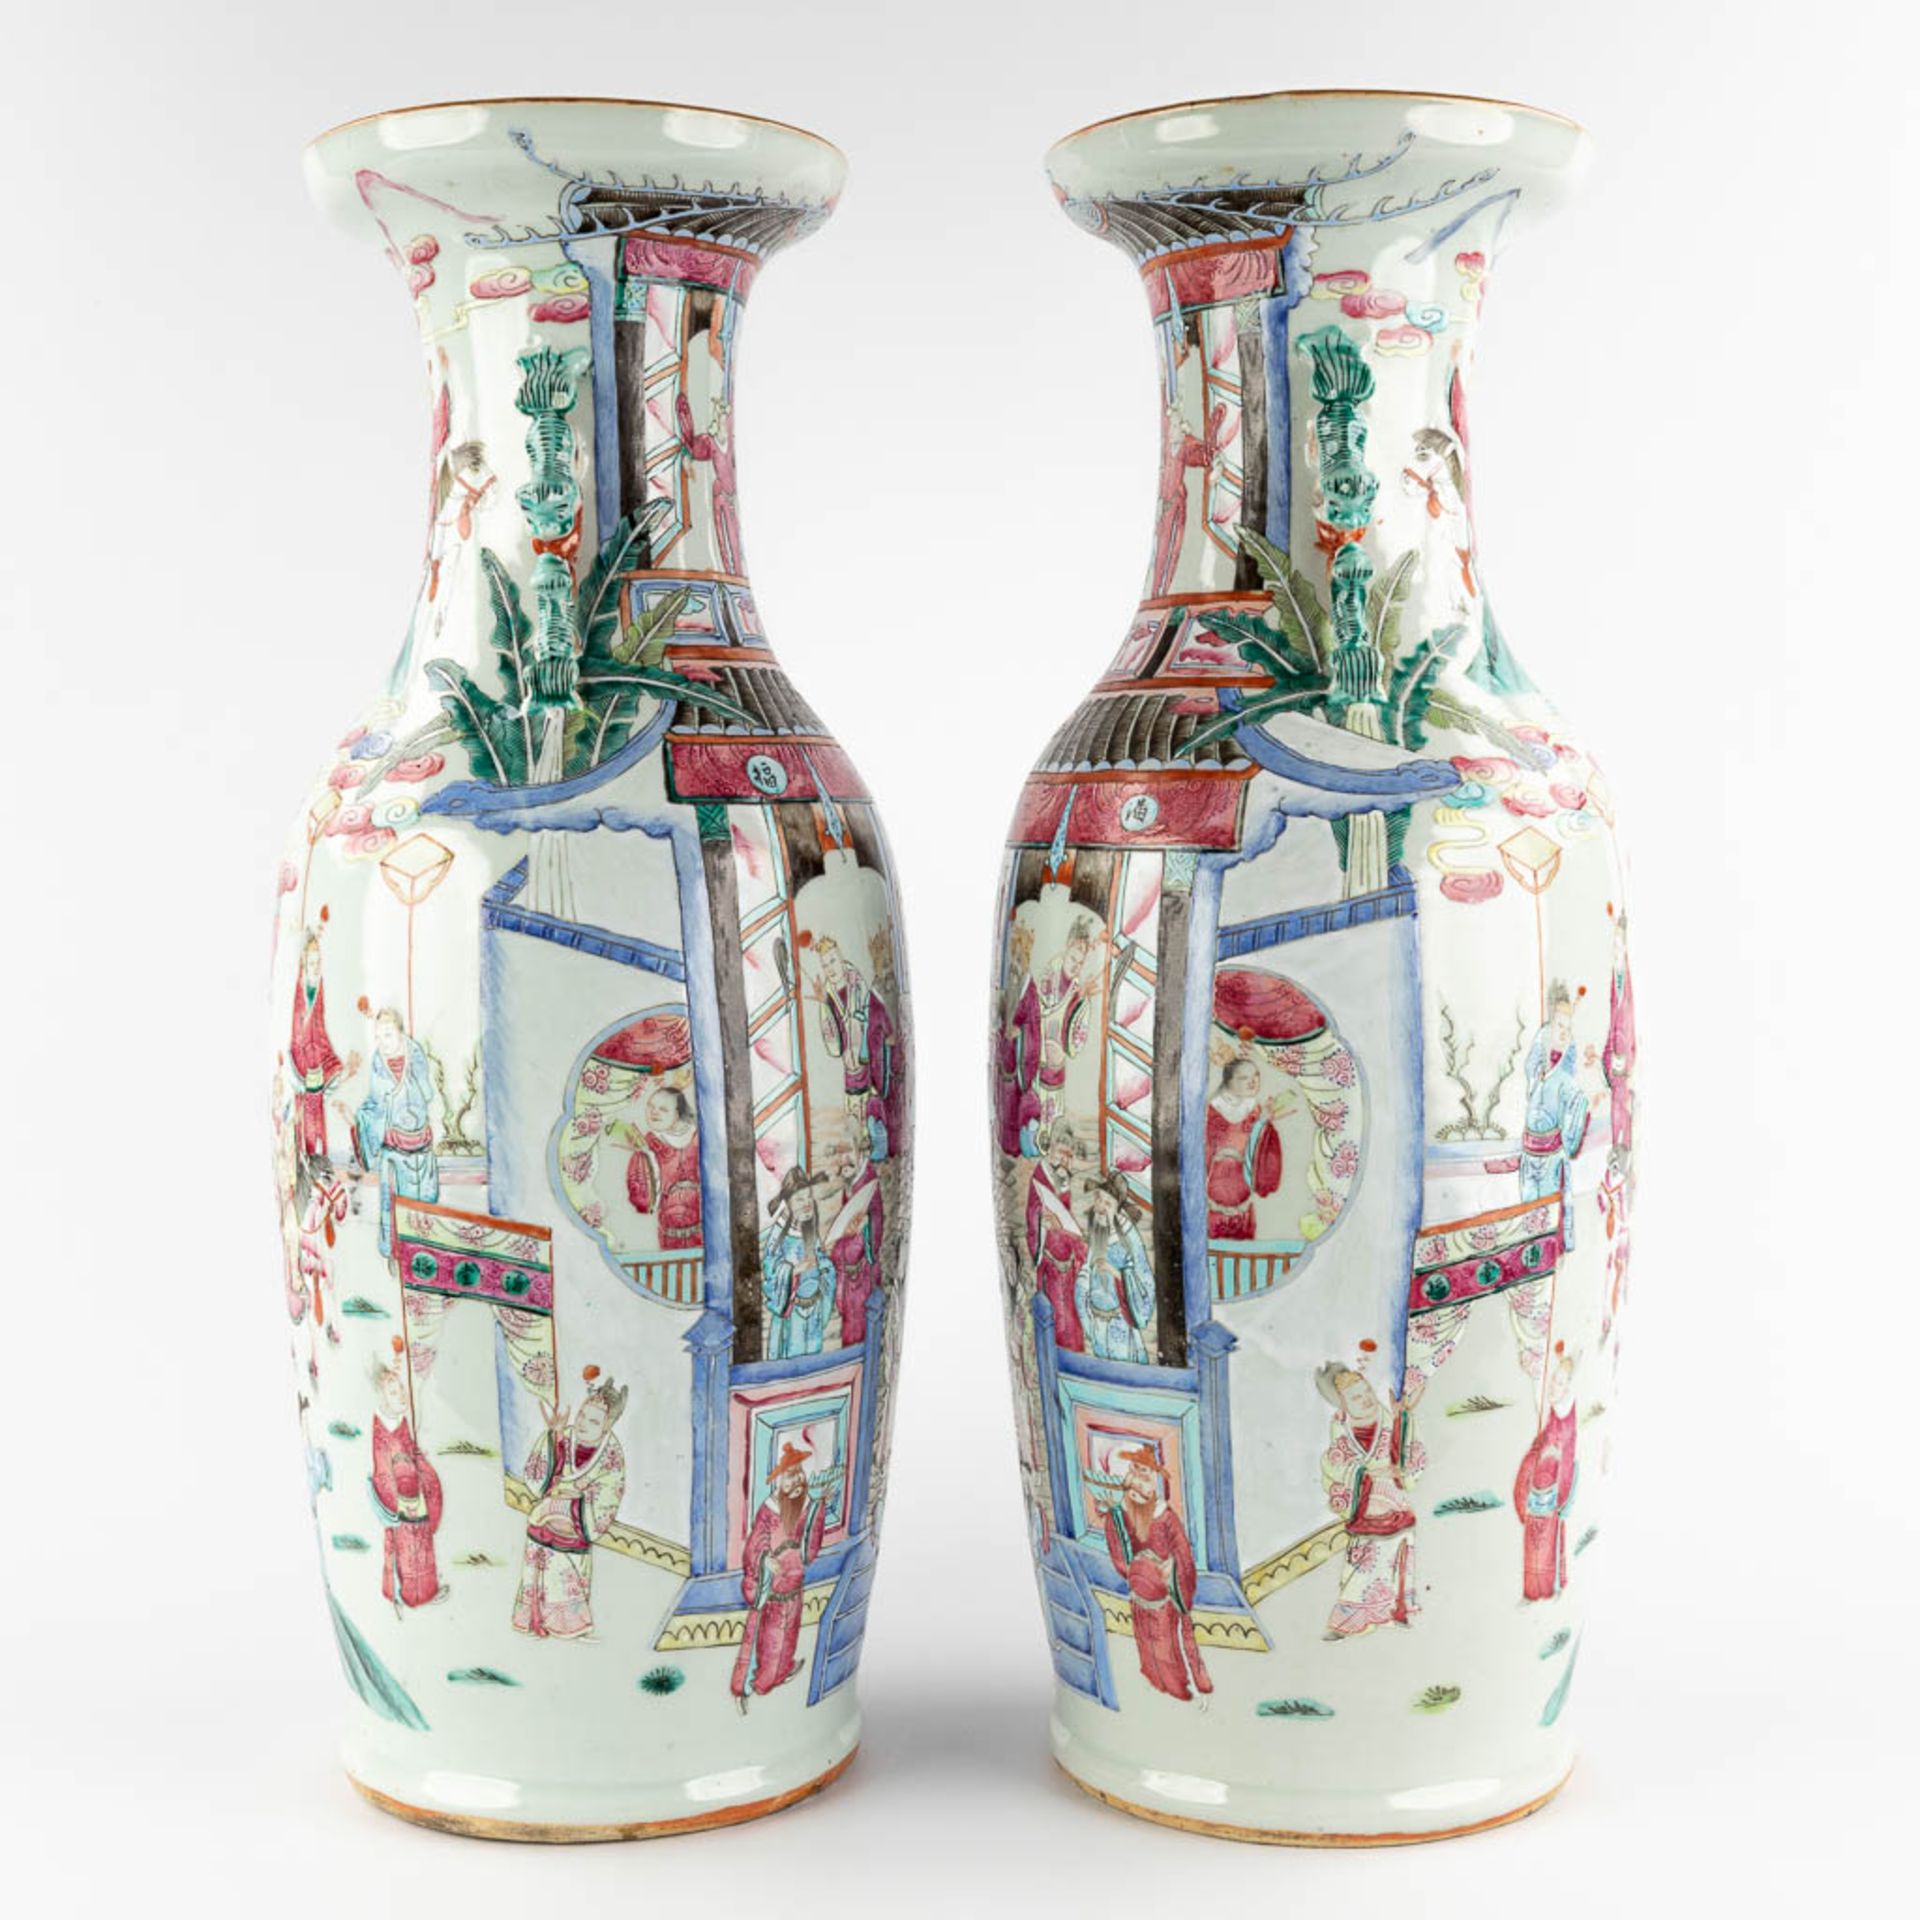 A pair of Chinese vases with Famille Rose vases with a temple scène, 19th C. (H:61 x D:23 cm) - Image 5 of 12